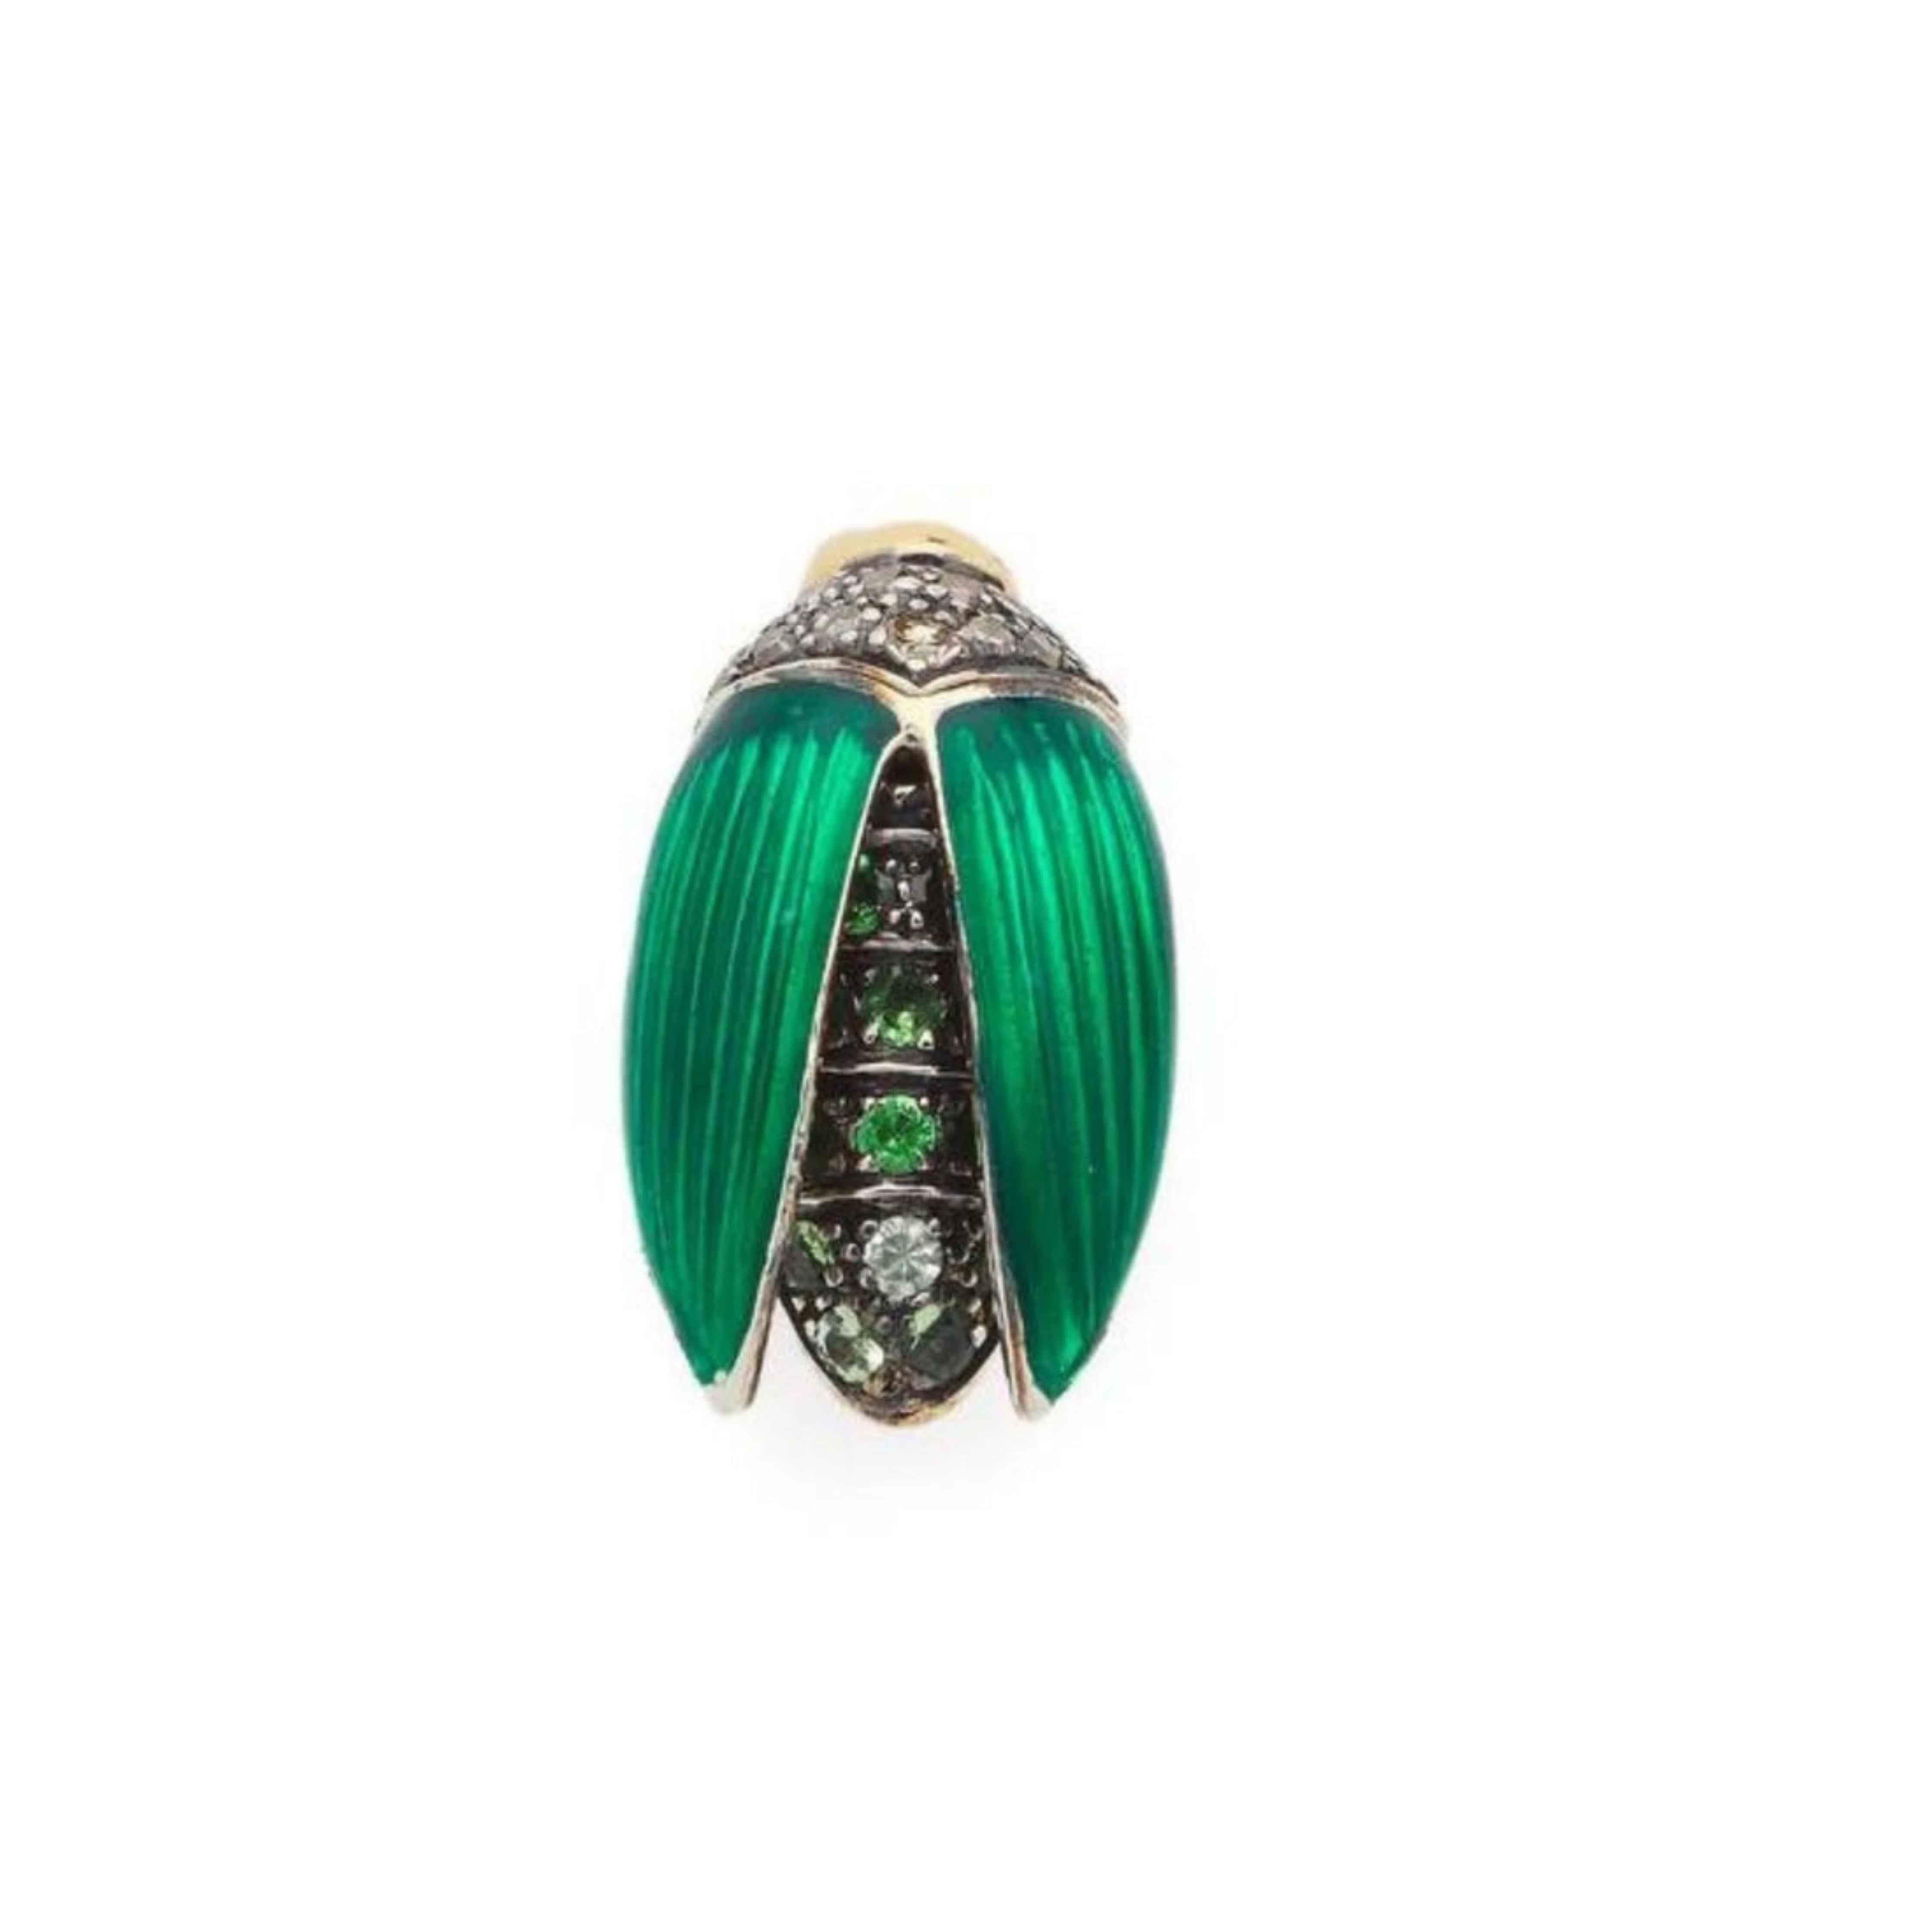 Bibi van der Velden, Mini Scarab Fly Wings Stud Earring. Crafted in 18K yellow gold and sterling silver, the earring features stunning green enamel wings and is decorated with brown diamonds and tsavorites.